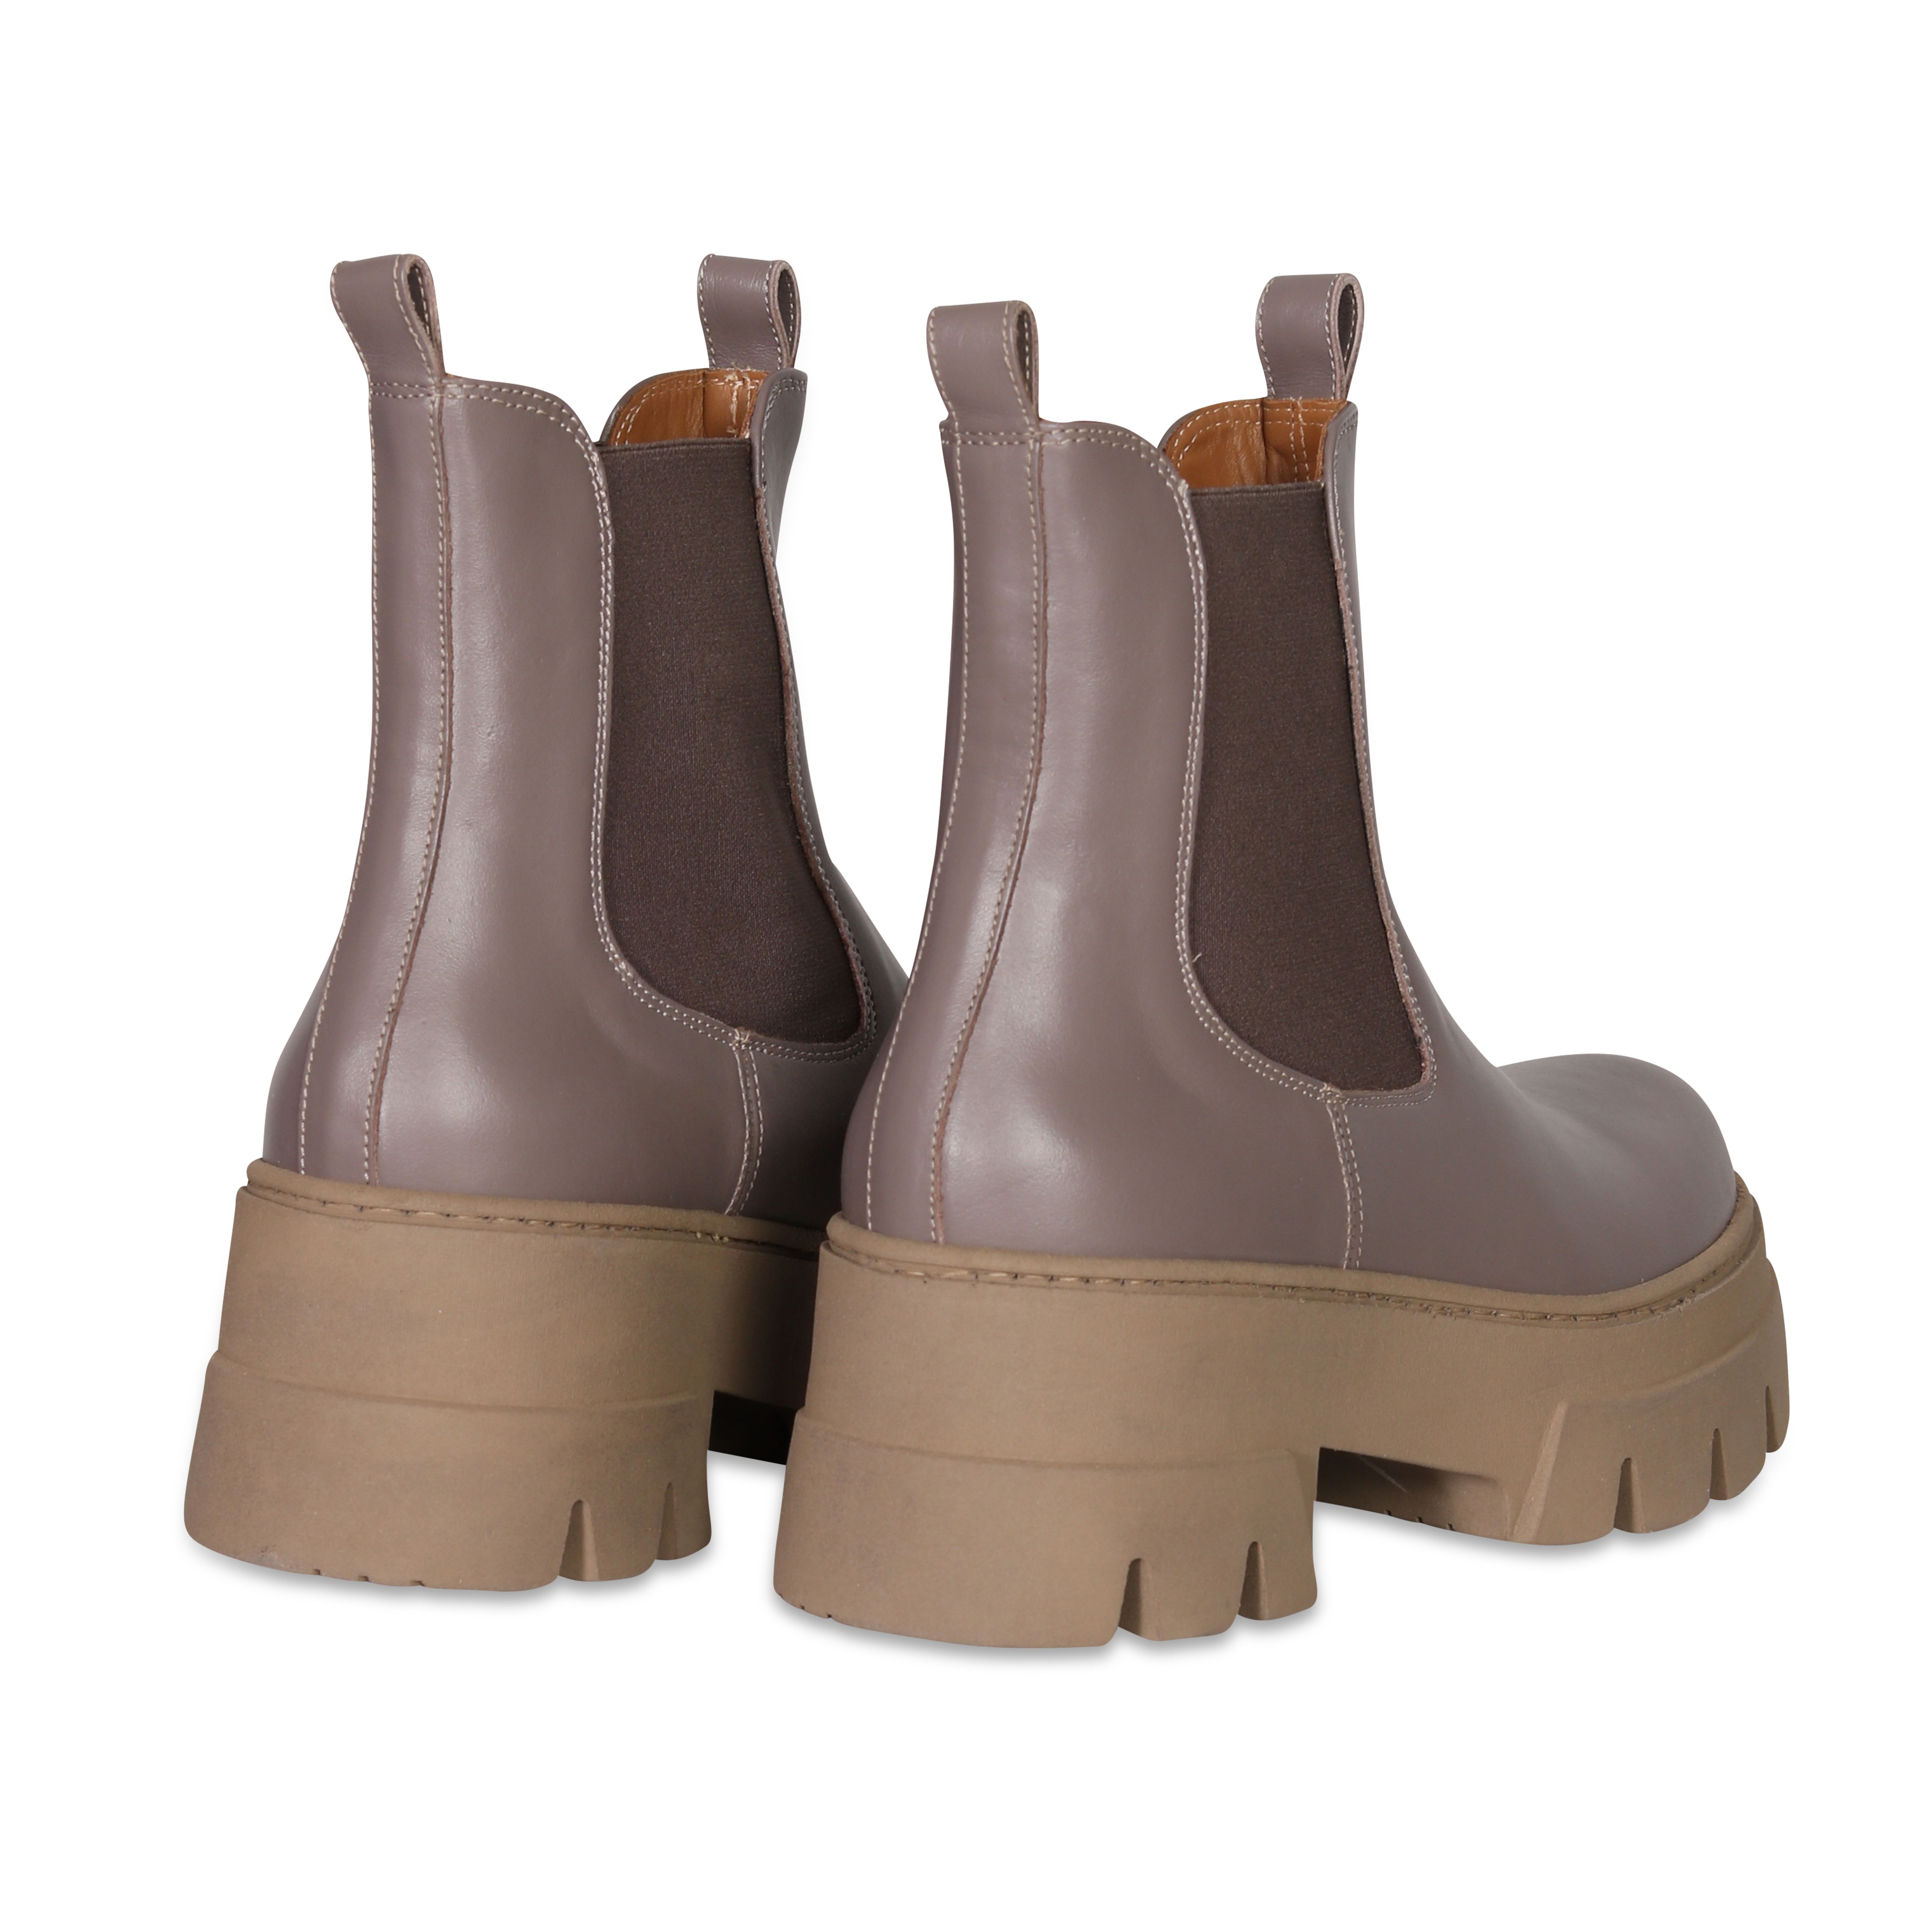 Ennequadro Chelsea Combat Boots in Greige/Beige Sole